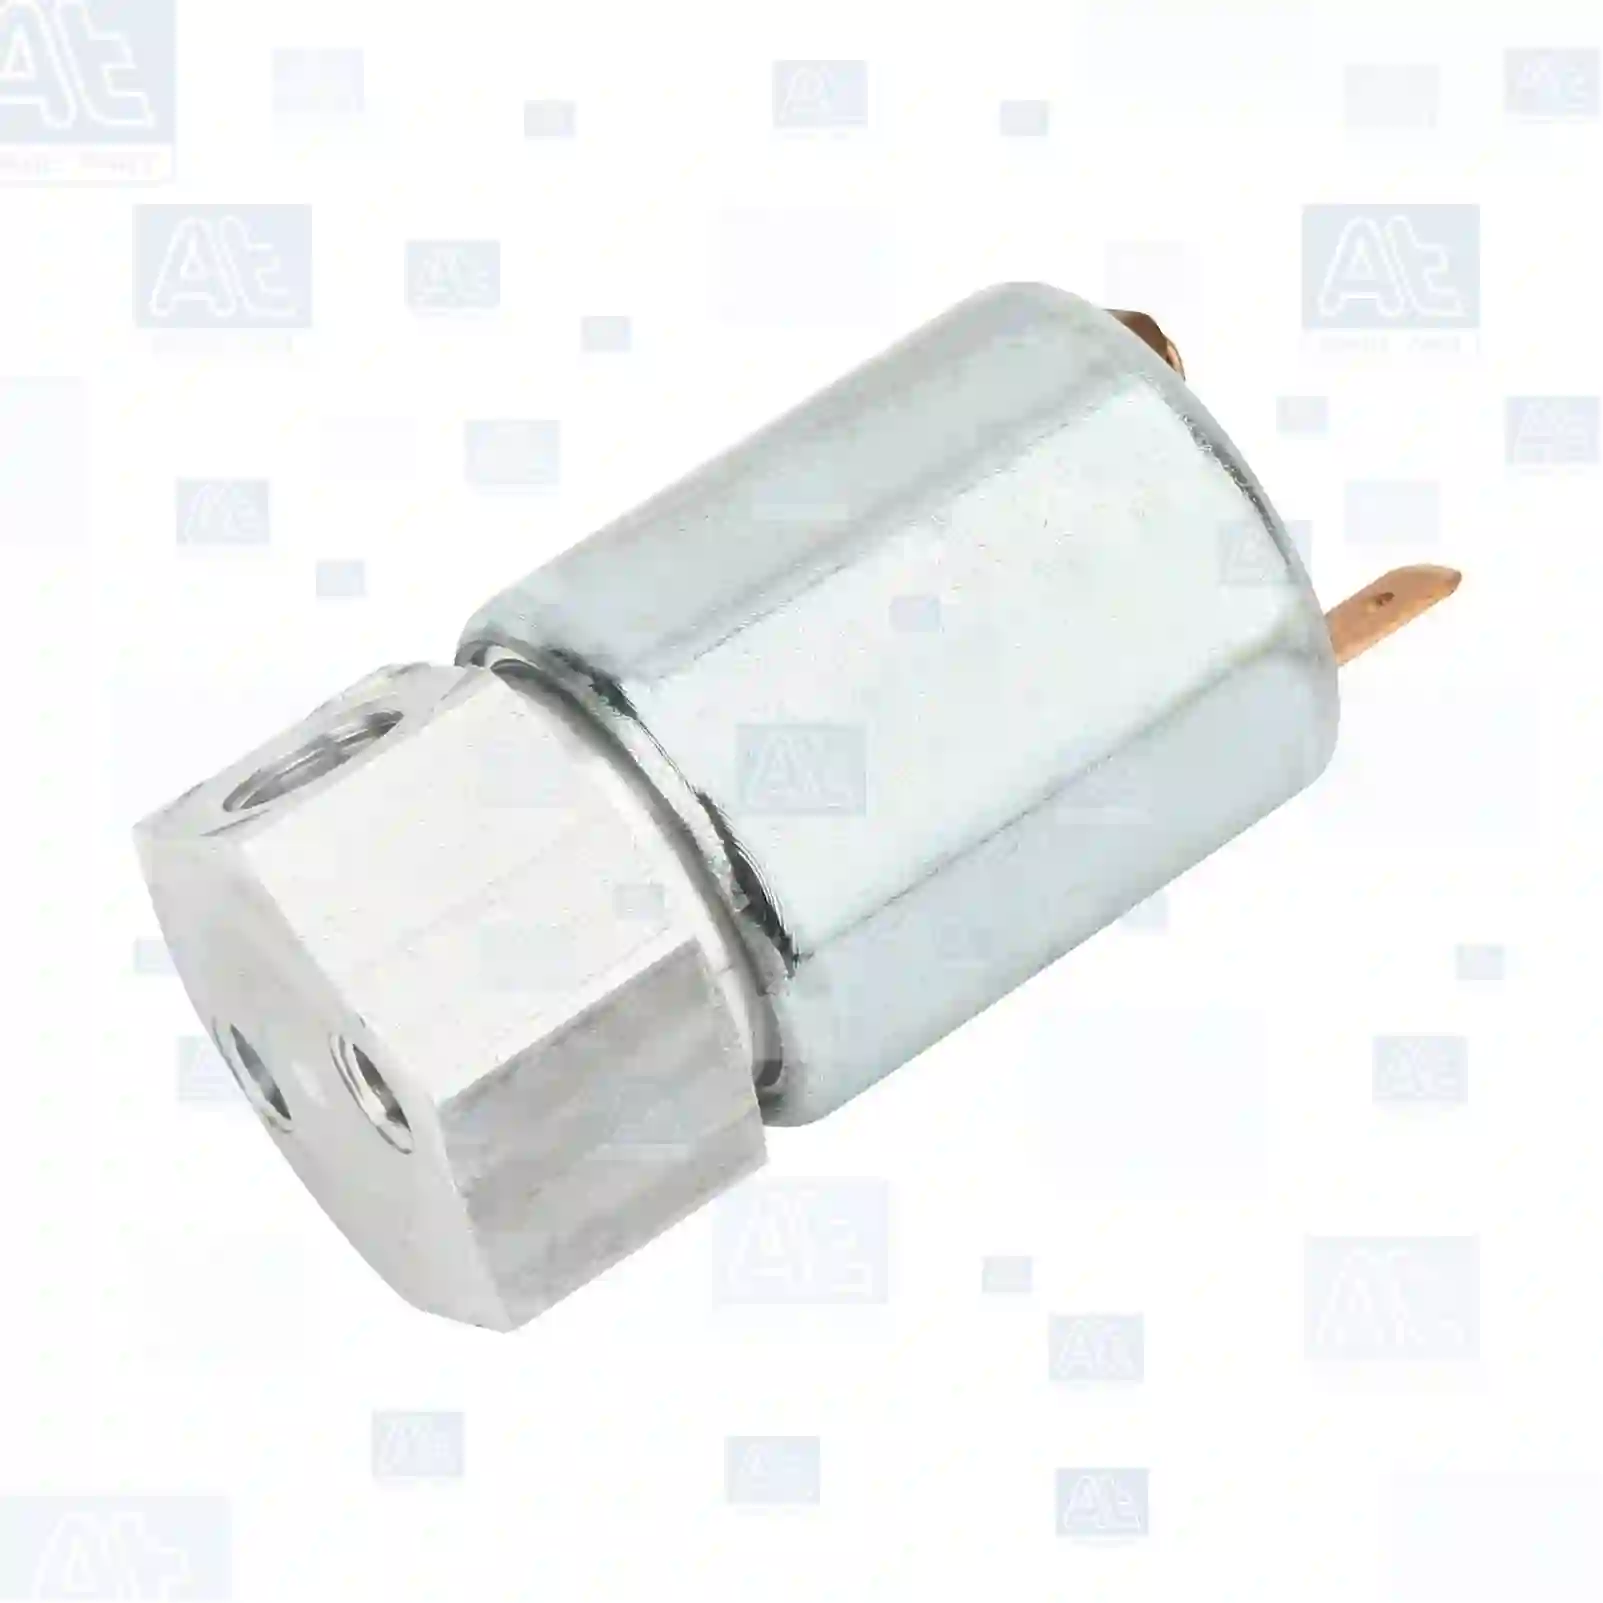 Solenoid valve, flame starter system, 77701526, 01161133, 04754840, 08122190, N443360, 04754840, 01173776, 02416643, 08122190, 42487003, 01161133, 04754840, 08122190, 5004864, 51259020010, 51259020033, 51259020052, 51259020059, 51259029010, 81259026043, 85200010681, 0000781549, N0443360, 5000270882, 5000589867, 5001000333, 292190600, 0001116153, 0001116610, 79100710076, 002416643, 4754840 ||  77701526 At Spare Part | Engine, Accelerator Pedal, Camshaft, Connecting Rod, Crankcase, Crankshaft, Cylinder Head, Engine Suspension Mountings, Exhaust Manifold, Exhaust Gas Recirculation, Filter Kits, Flywheel Housing, General Overhaul Kits, Engine, Intake Manifold, Oil Cleaner, Oil Cooler, Oil Filter, Oil Pump, Oil Sump, Piston & Liner, Sensor & Switch, Timing Case, Turbocharger, Cooling System, Belt Tensioner, Coolant Filter, Coolant Pipe, Corrosion Prevention Agent, Drive, Expansion Tank, Fan, Intercooler, Monitors & Gauges, Radiator, Thermostat, V-Belt / Timing belt, Water Pump, Fuel System, Electronical Injector Unit, Feed Pump, Fuel Filter, cpl., Fuel Gauge Sender,  Fuel Line, Fuel Pump, Fuel Tank, Injection Line Kit, Injection Pump, Exhaust System, Clutch & Pedal, Gearbox, Propeller Shaft, Axles, Brake System, Hubs & Wheels, Suspension, Leaf Spring, Universal Parts / Accessories, Steering, Electrical System, Cabin Solenoid valve, flame starter system, 77701526, 01161133, 04754840, 08122190, N443360, 04754840, 01173776, 02416643, 08122190, 42487003, 01161133, 04754840, 08122190, 5004864, 51259020010, 51259020033, 51259020052, 51259020059, 51259029010, 81259026043, 85200010681, 0000781549, N0443360, 5000270882, 5000589867, 5001000333, 292190600, 0001116153, 0001116610, 79100710076, 002416643, 4754840 ||  77701526 At Spare Part | Engine, Accelerator Pedal, Camshaft, Connecting Rod, Crankcase, Crankshaft, Cylinder Head, Engine Suspension Mountings, Exhaust Manifold, Exhaust Gas Recirculation, Filter Kits, Flywheel Housing, General Overhaul Kits, Engine, Intake Manifold, Oil Cleaner, Oil Cooler, Oil Filter, Oil Pump, Oil Sump, Piston & Liner, Sensor & Switch, Timing Case, Turbocharger, Cooling System, Belt Tensioner, Coolant Filter, Coolant Pipe, Corrosion Prevention Agent, Drive, Expansion Tank, Fan, Intercooler, Monitors & Gauges, Radiator, Thermostat, V-Belt / Timing belt, Water Pump, Fuel System, Electronical Injector Unit, Feed Pump, Fuel Filter, cpl., Fuel Gauge Sender,  Fuel Line, Fuel Pump, Fuel Tank, Injection Line Kit, Injection Pump, Exhaust System, Clutch & Pedal, Gearbox, Propeller Shaft, Axles, Brake System, Hubs & Wheels, Suspension, Leaf Spring, Universal Parts / Accessories, Steering, Electrical System, Cabin